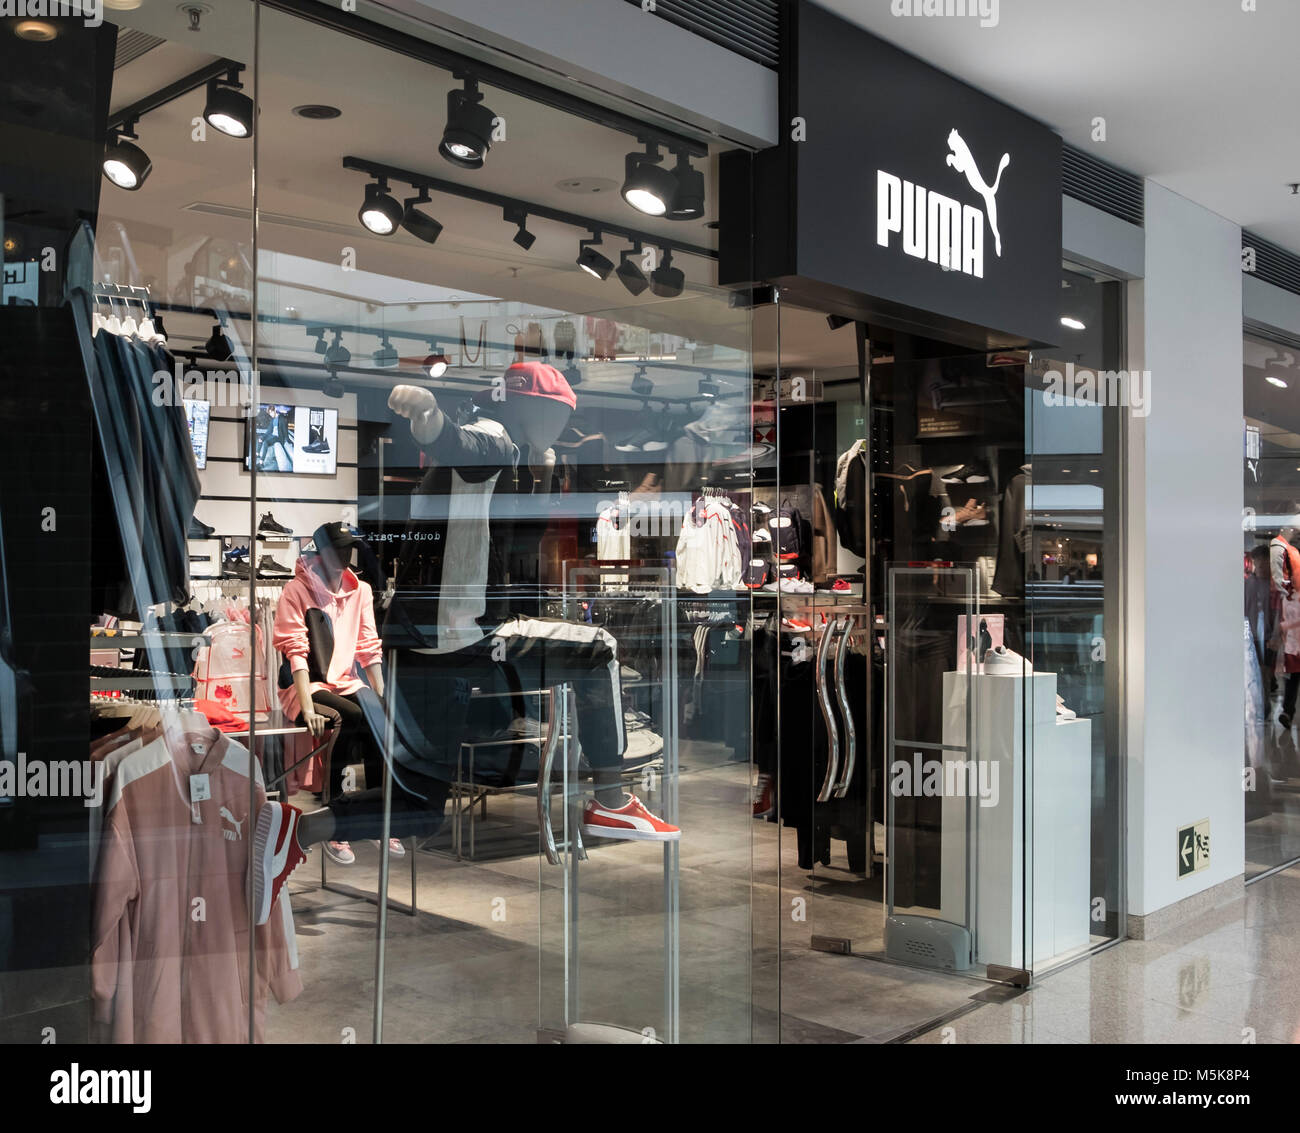 Puma Shop High Resolution Stock Photography and Images - Alamy